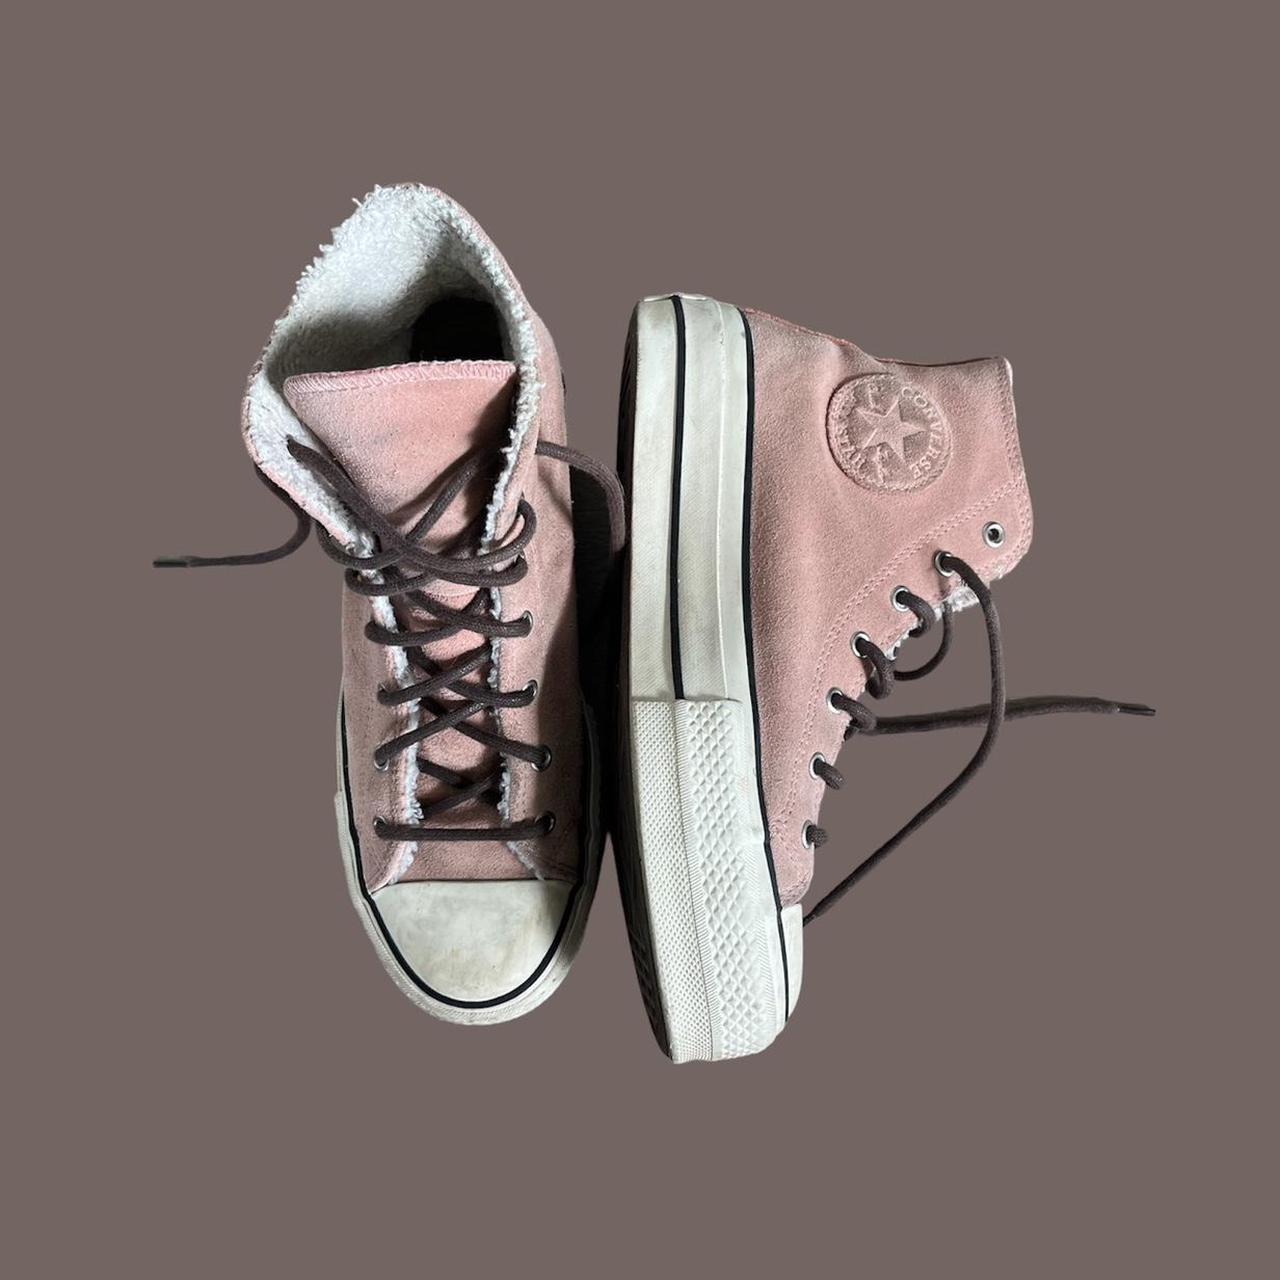 Converse Women's Pink and Brown Trainers | Depop